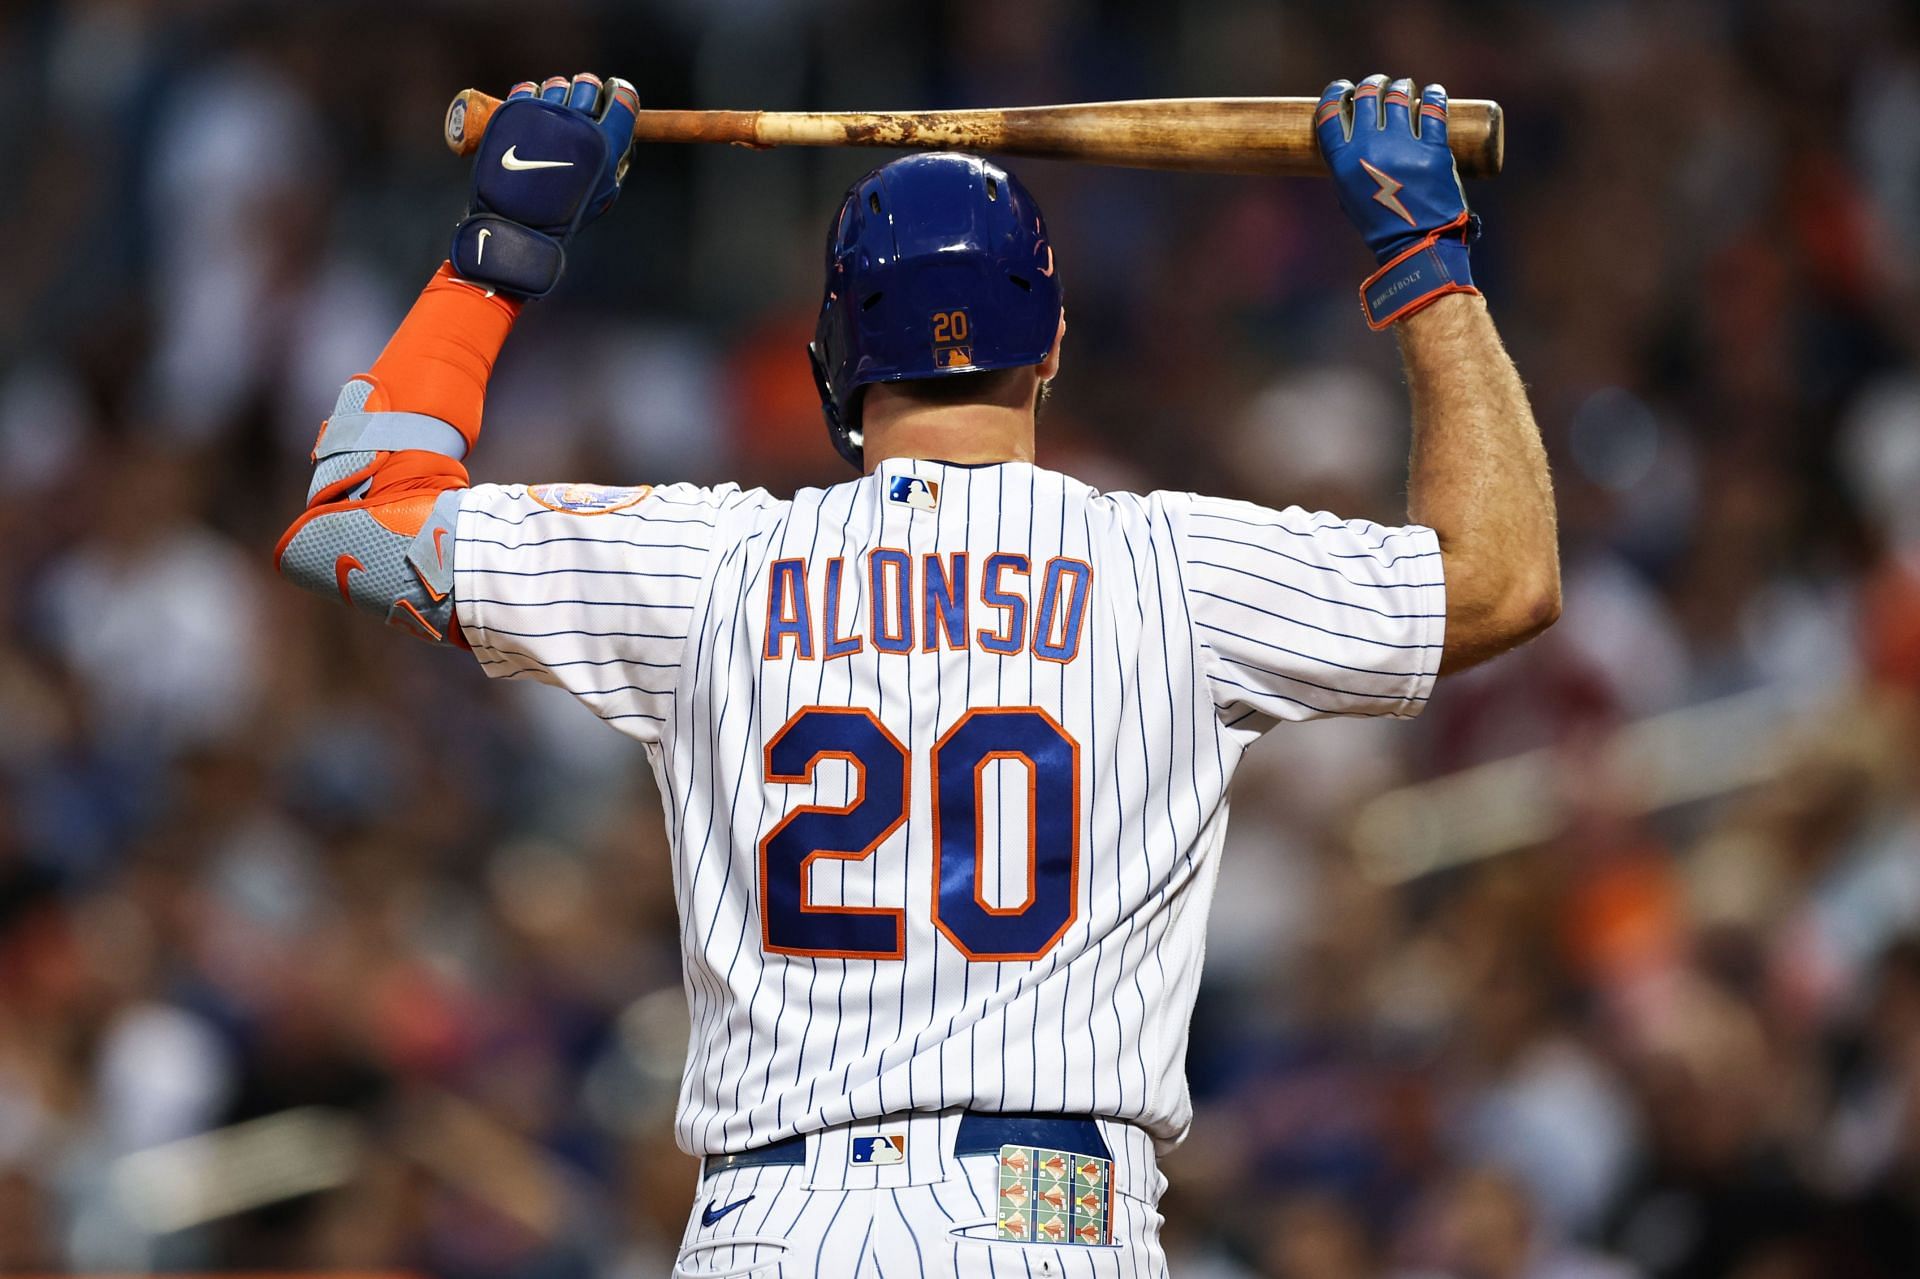 Pete Alonso reacts after popping out in a Milwaukee Brewers v New York Mets game.